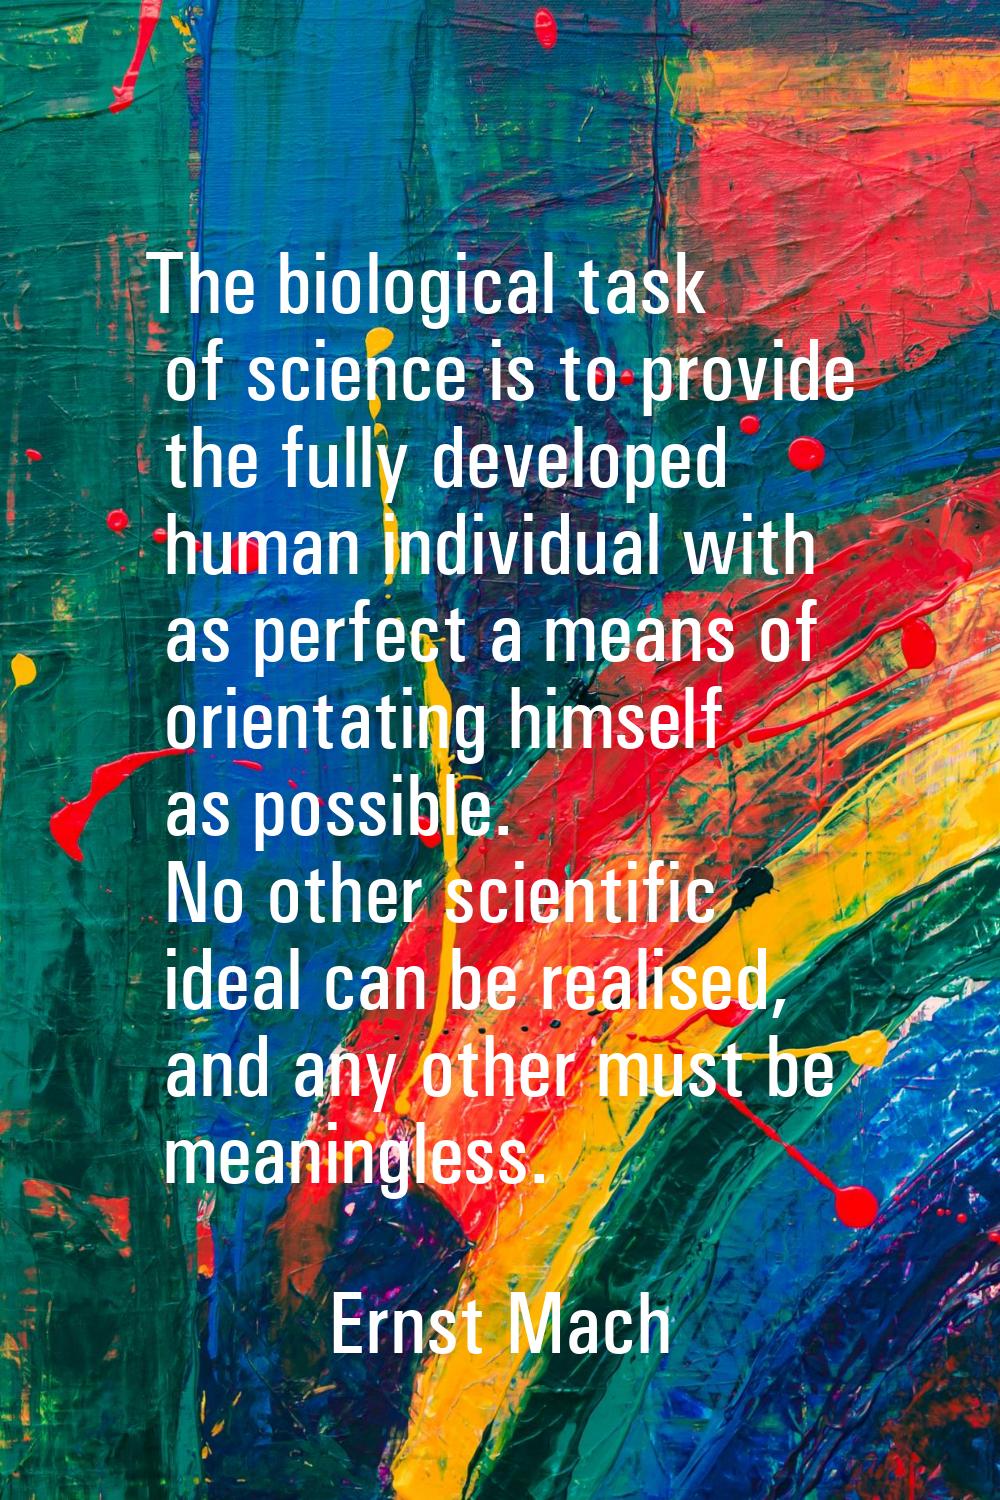 The biological task of science is to provide the fully developed human individual with as perfect a